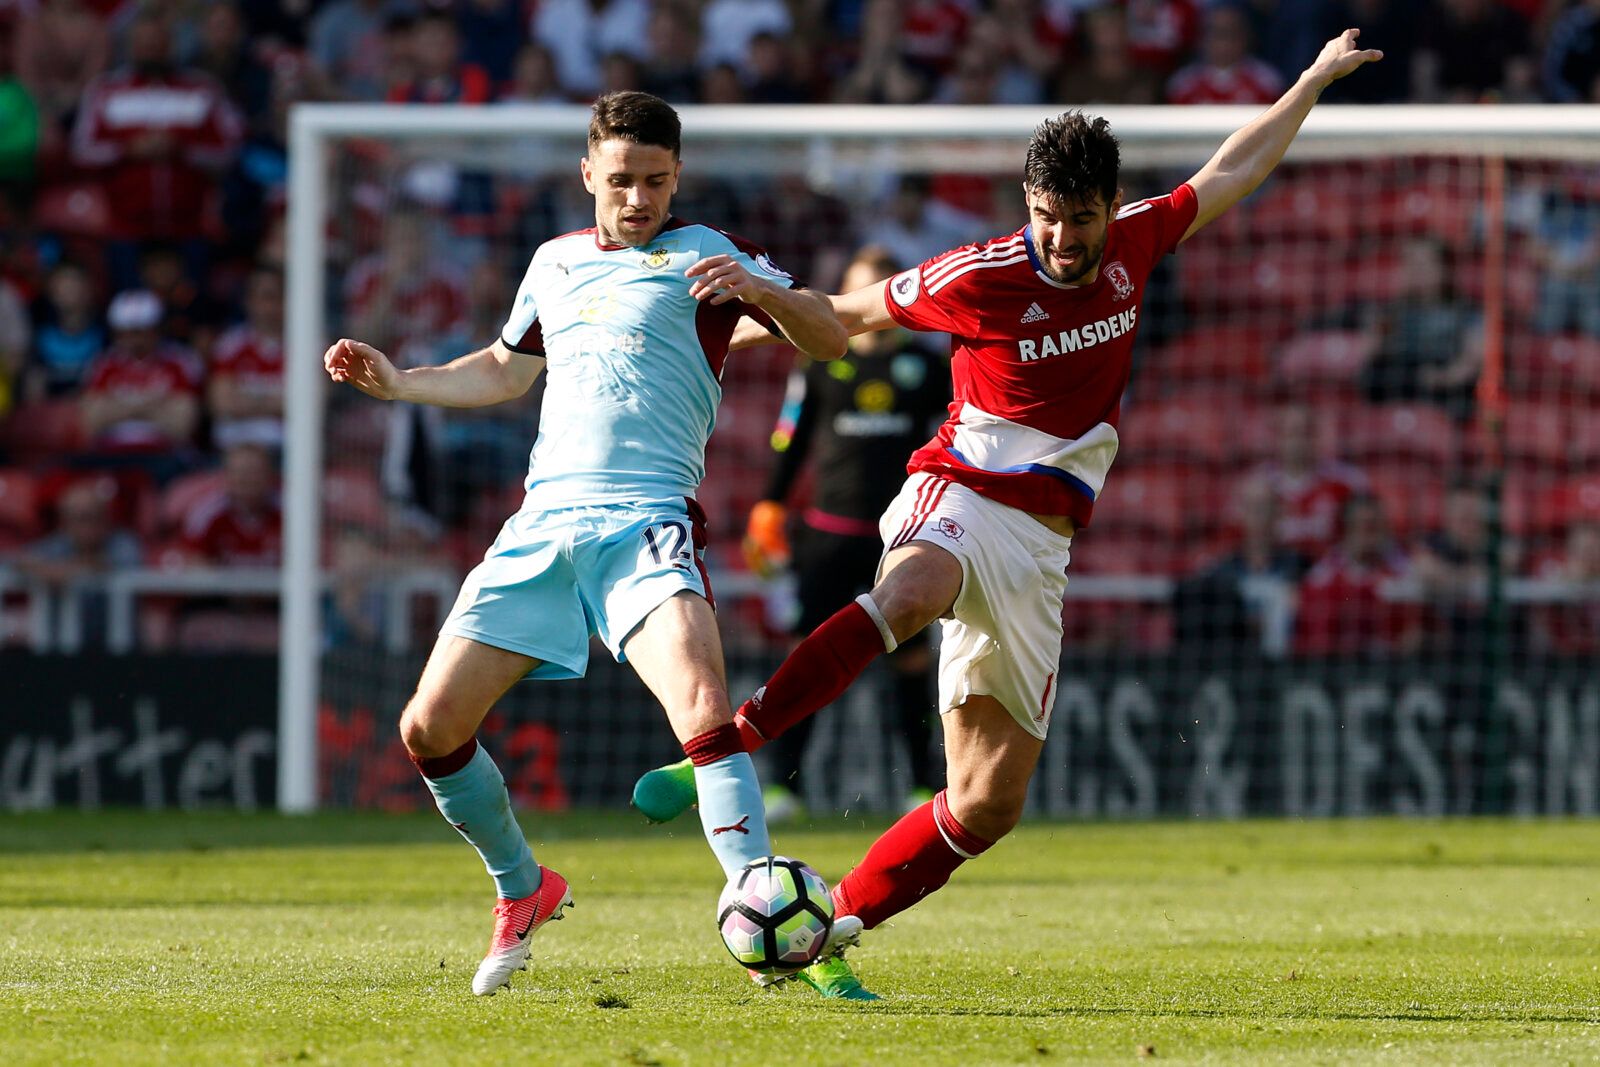 Britain Football Soccer - Middlesbrough v Burnley - Premier League - The Riverside Stadium - 8/4/17 Burnley's Robbie Brady in action with Middlesbrough's Antonio Barragan  Action Images via Reuters / Craig Brough Livepic EDITORIAL USE ONLY. No use with unauthorized audio, video, data, fixture lists, club/league logos or 